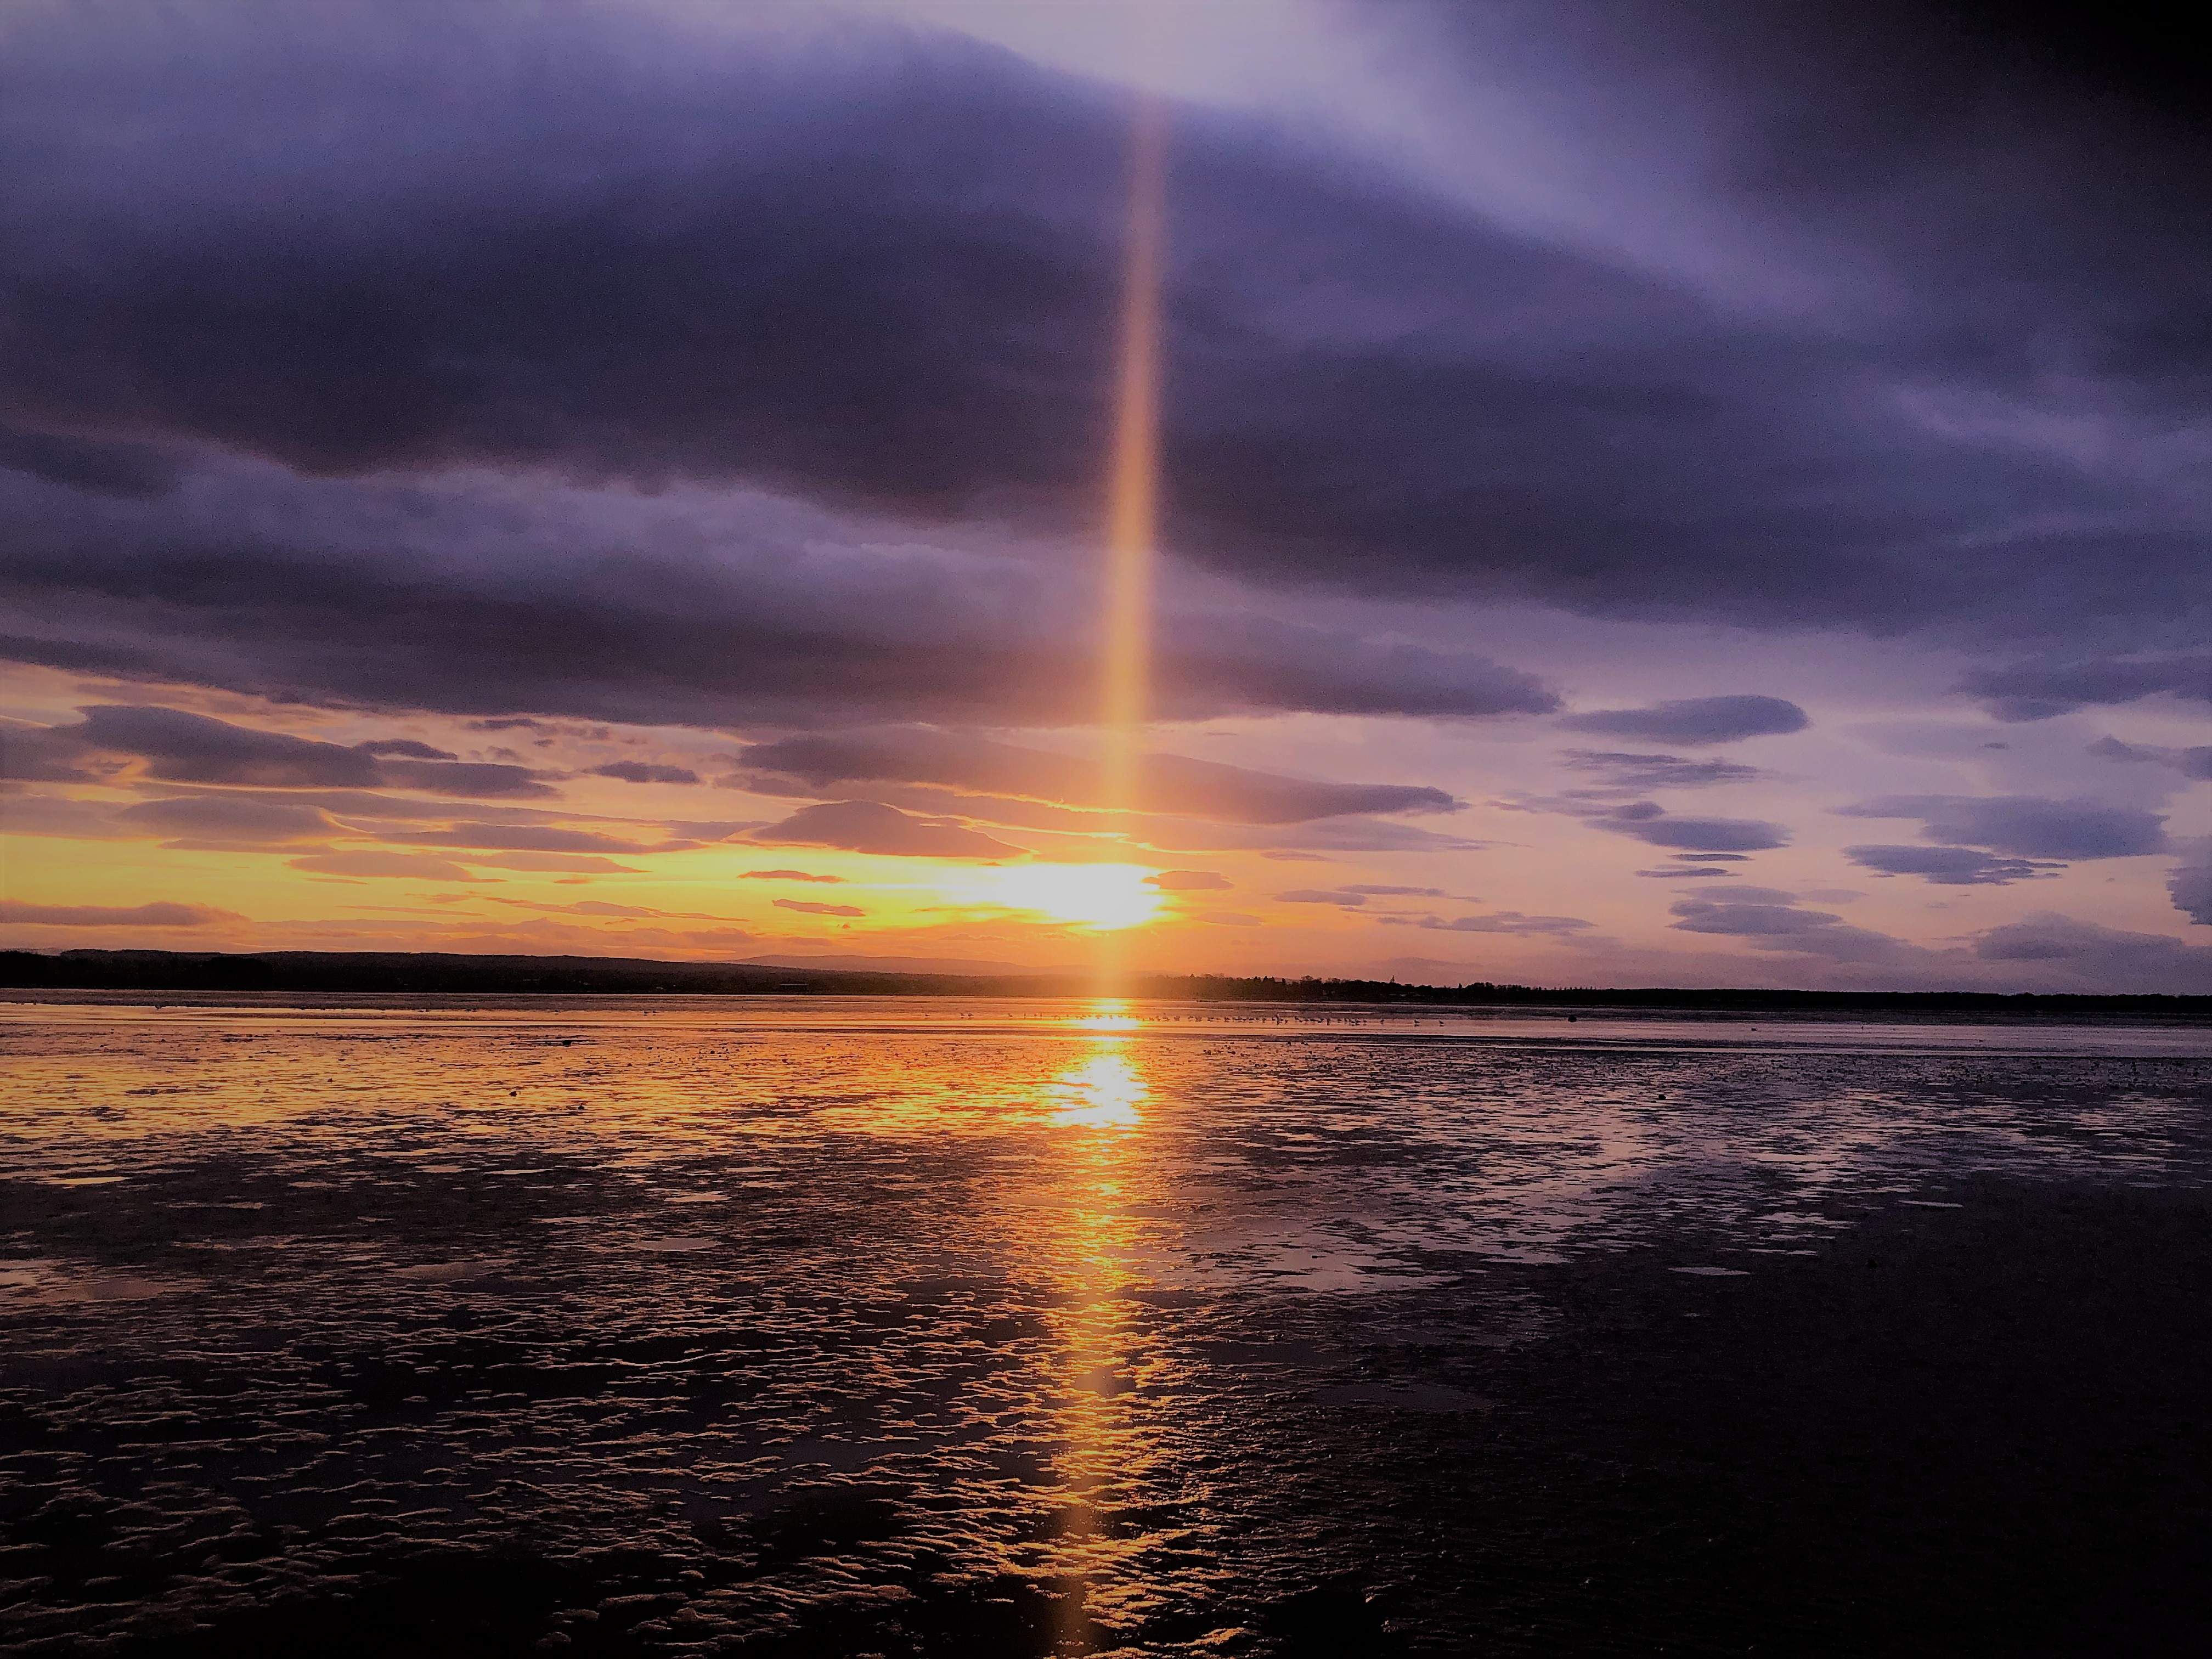 Another glorious sunset over Findhorn Bay